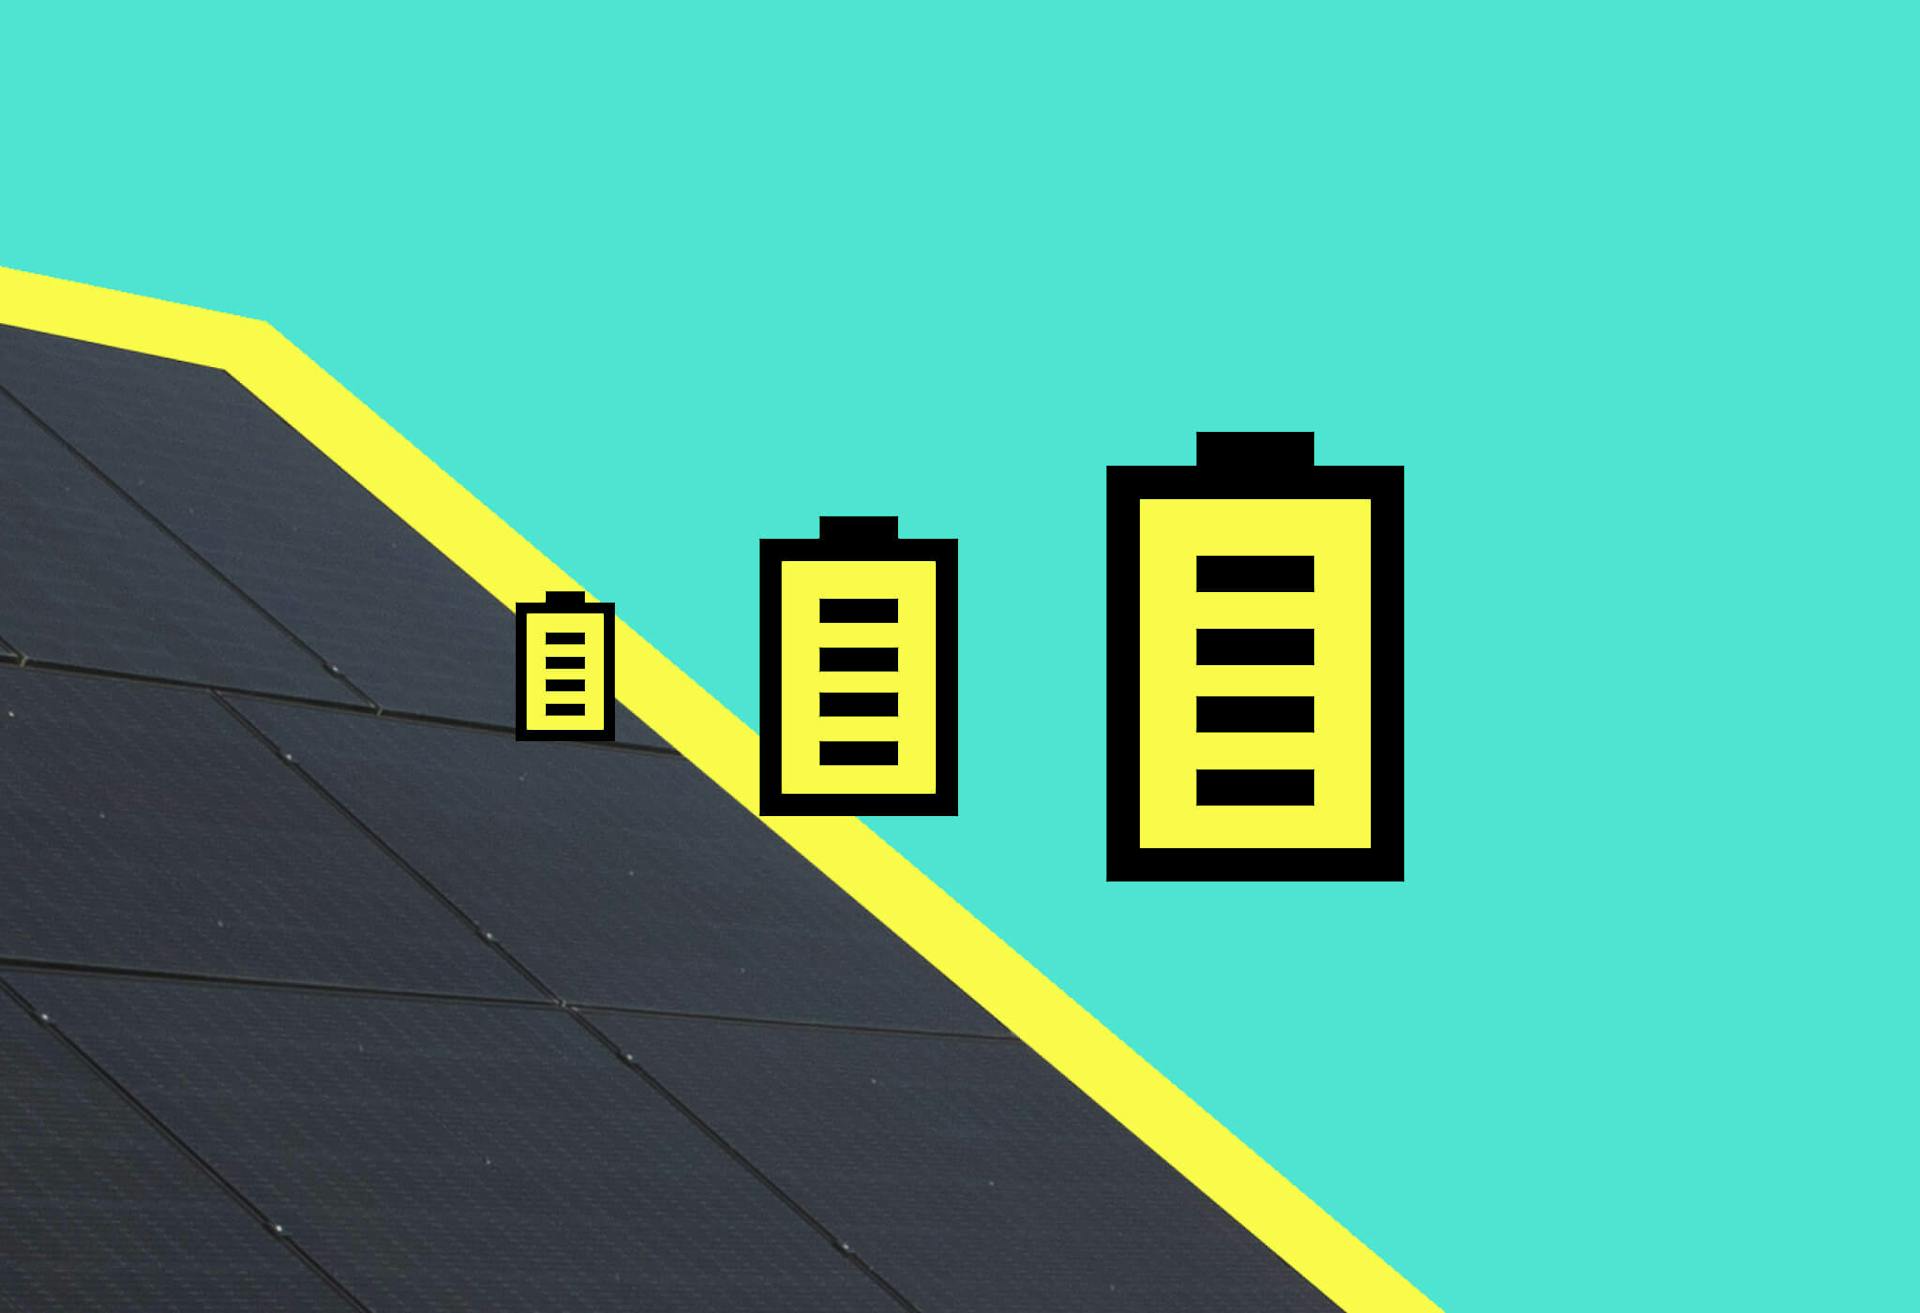 A black solar panel in the corner with a yellow outline, three cartoon solar batteries in the centre (of varying sizes)